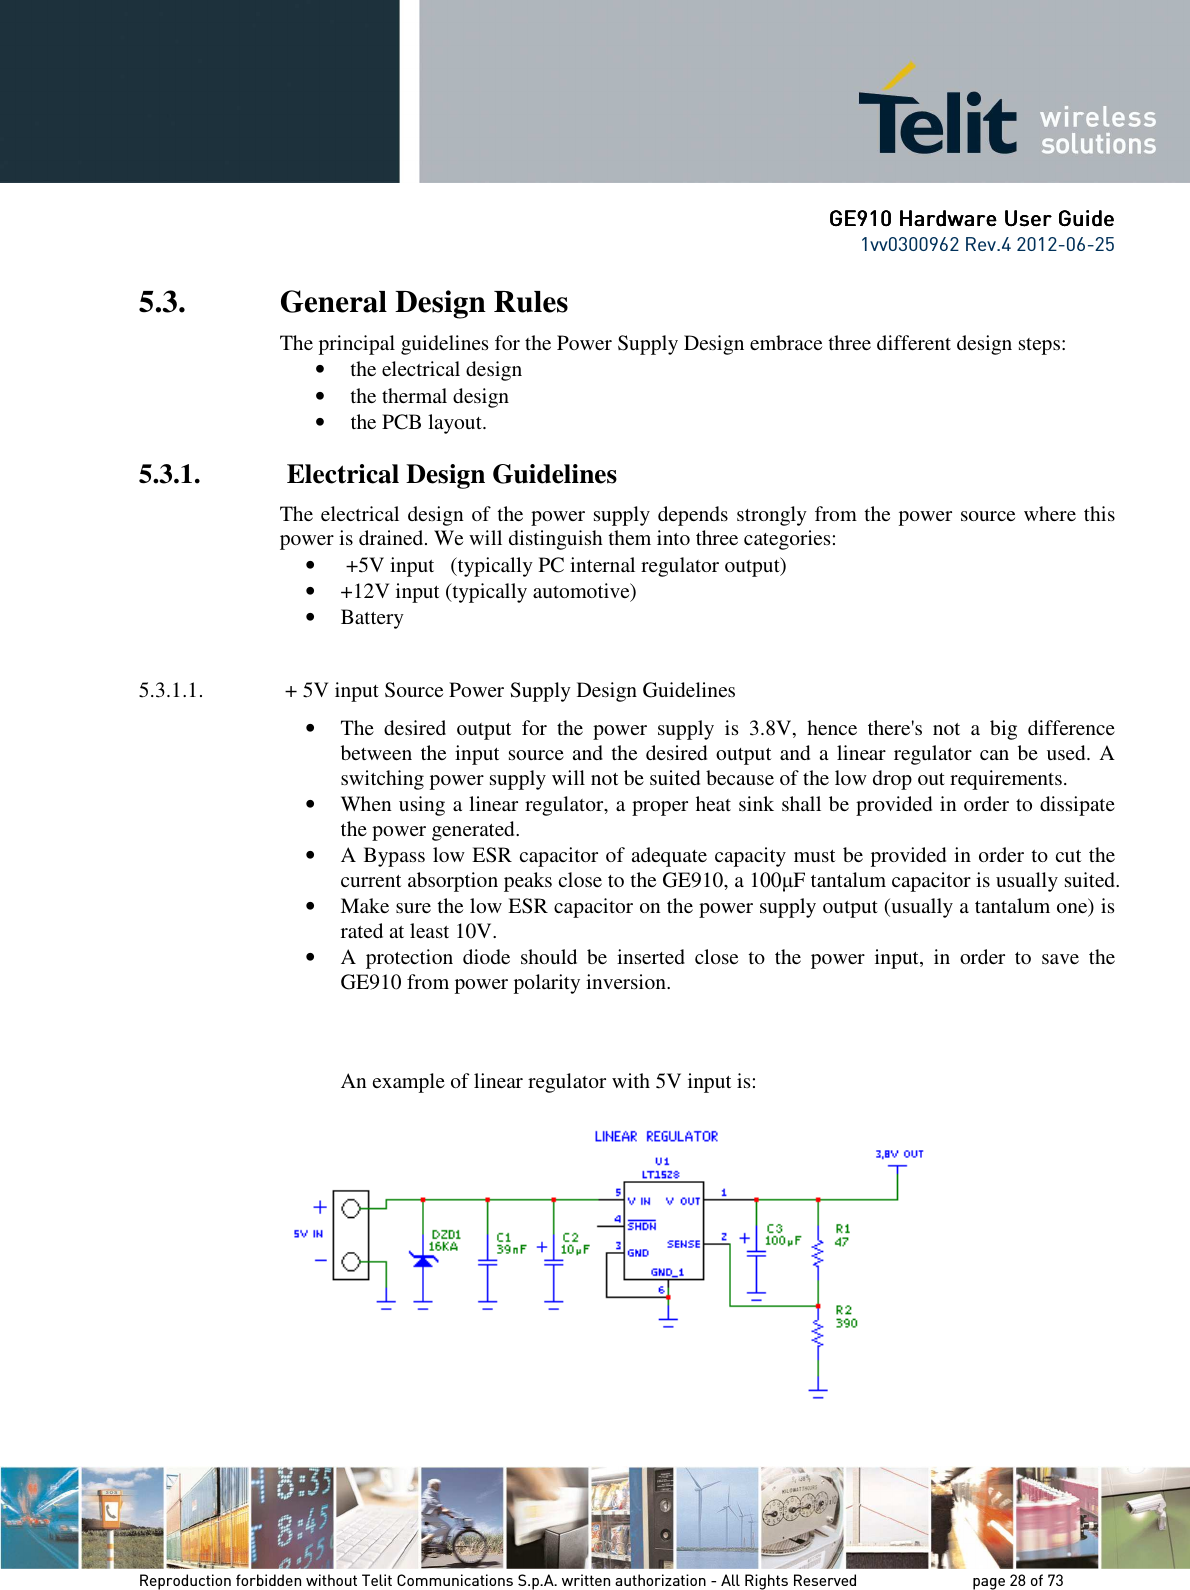      GE9GE9GE9GE910 Hardware User Guide10 Hardware User Guide10 Hardware User Guide10 Hardware User Guide    1vv0300962 Rev.4 2012-06-25    Reproduction forbidden without Telit Communications S.p.A. written authorization - All Rights Reserved    page 28 of 73 Mod. 0805 2011-07 Rev.2 5.3. General Design Rules The principal guidelines for the Power Supply Design embrace three different design steps: • the electrical design • the thermal design • the PCB layout. 5.3.1.  Electrical Design Guidelines The electrical design of the power supply depends strongly from the power source where this power is drained. We will distinguish them into three categories: •  +5V input   (typically PC internal regulator output) • +12V input (typically automotive) • Battery  5.3.1.1.  + 5V input Source Power Supply Design Guidelines • The  desired  output  for  the  power  supply  is  3.8V,  hence  there&apos;s  not  a  big  difference between the input source and the desired output and a linear regulator can be  used. A switching power supply will not be suited because of the low drop out requirements. • When using a linear regulator, a proper heat sink shall be provided in order to dissipate the power generated. • A Bypass low ESR capacitor of adequate capacity must be provided in order to cut the current absorption peaks close to the GE910, a 100µF tantalum capacitor is usually suited. • Make sure the low ESR capacitor on the power supply output (usually a tantalum one) is rated at least 10V. • A  protection  diode  should  be  inserted  close  to  the  power  input,  in  order  to  save  the GE910 from power polarity inversion.    An example of linear regulator with 5V input is:    